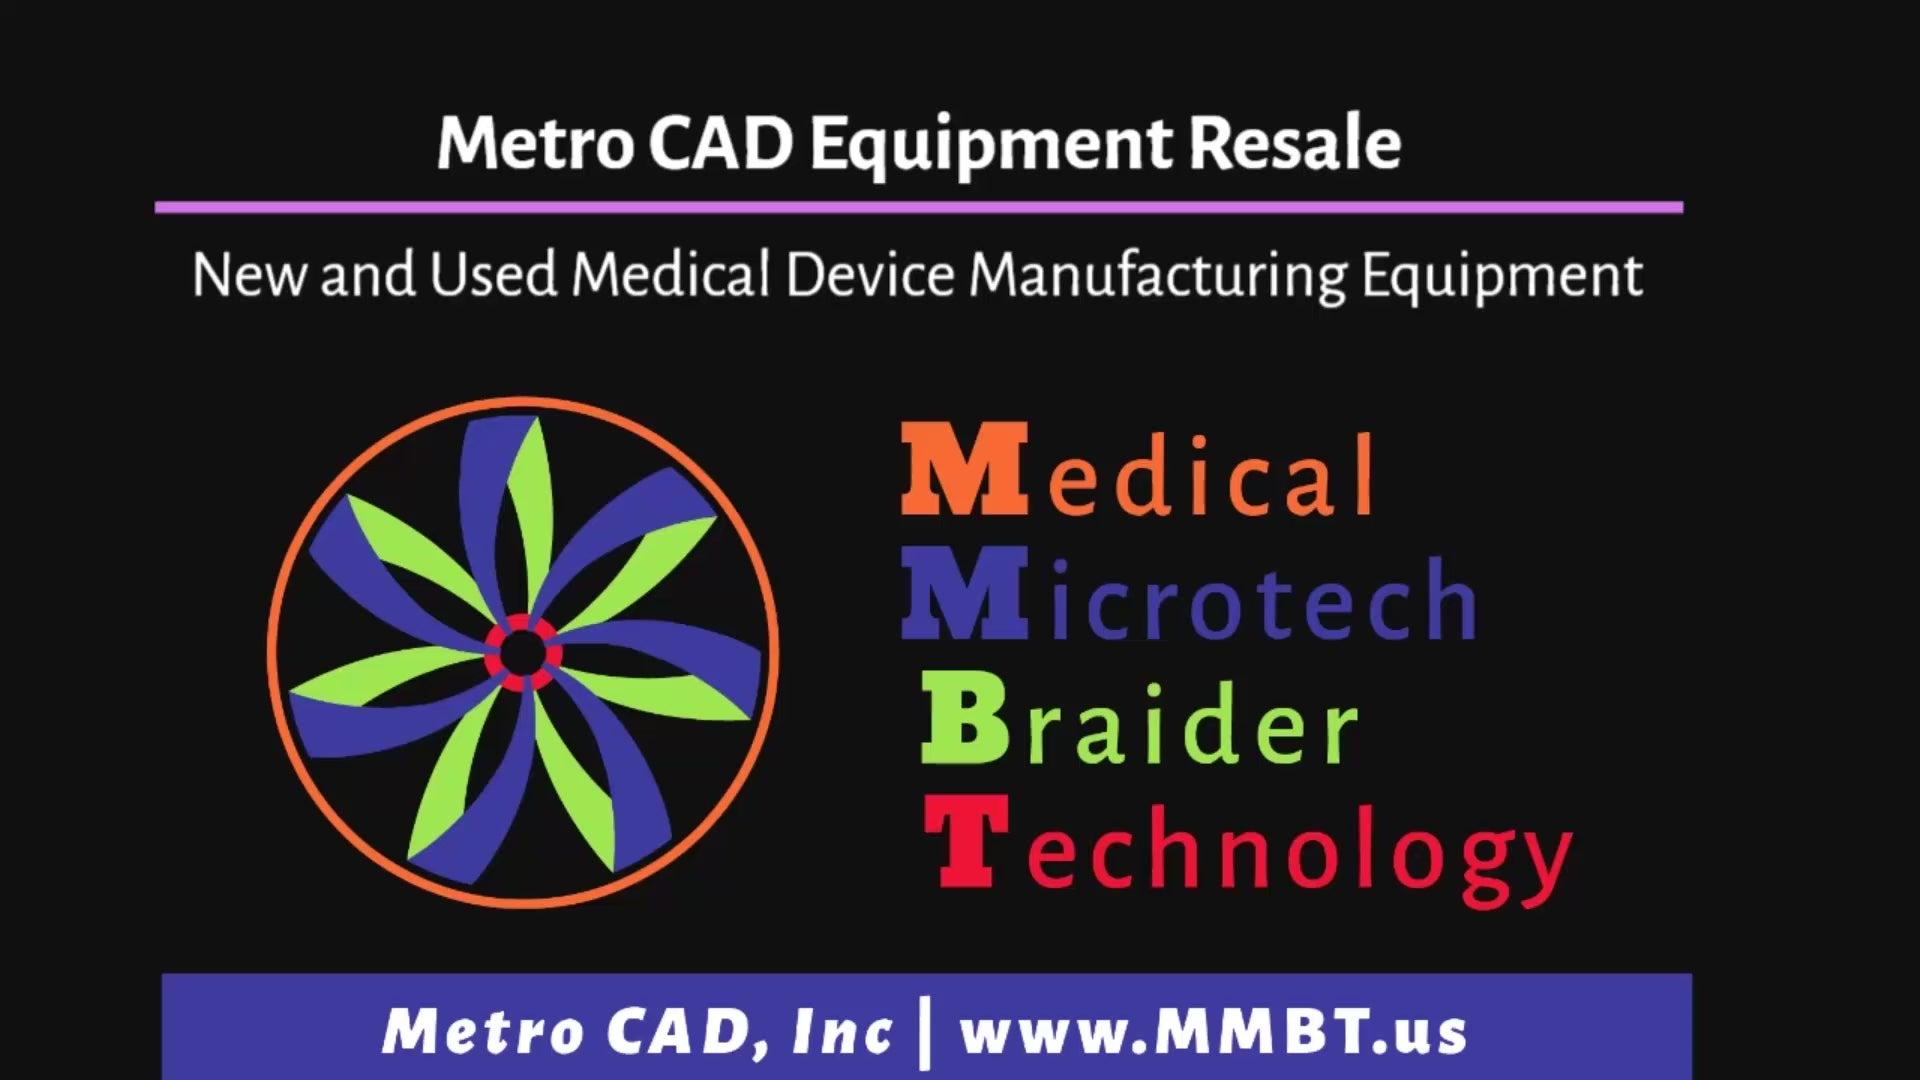 Load video: Metro CAD Equipment Resale. New and Used Medical Device Manufacturing Equipment.